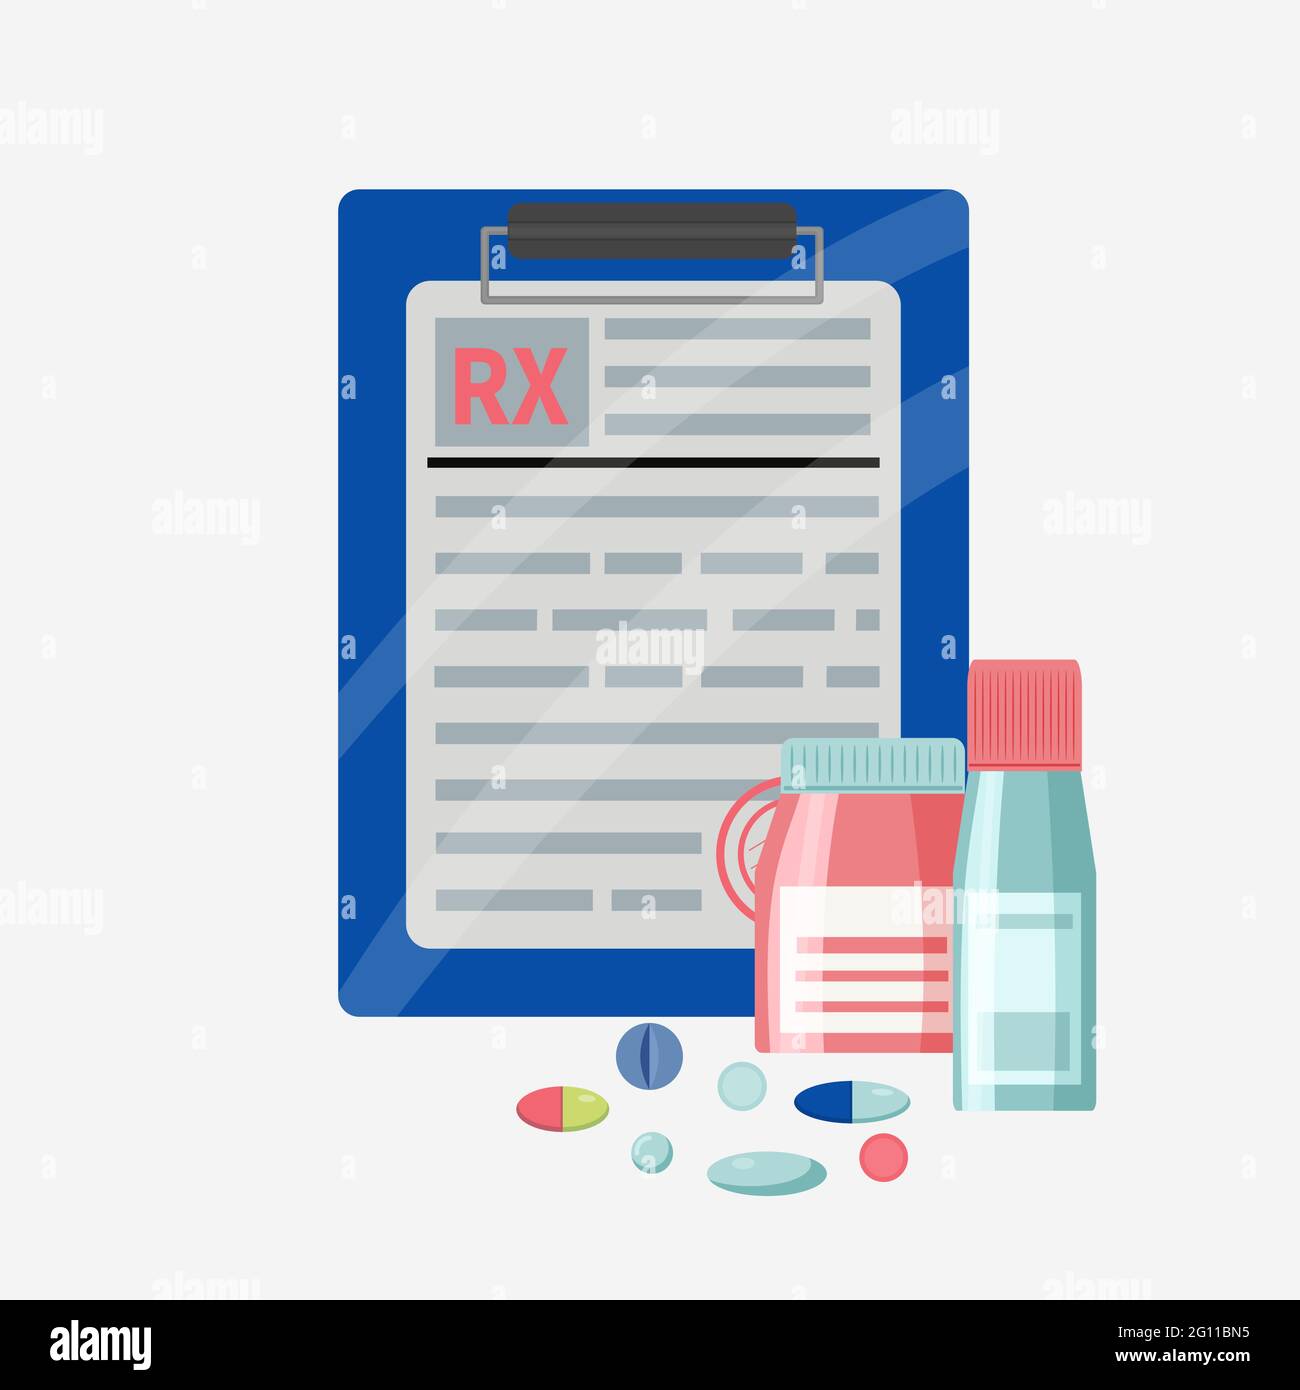 RX form for medicines and jars, blisters, pills Stock Vector